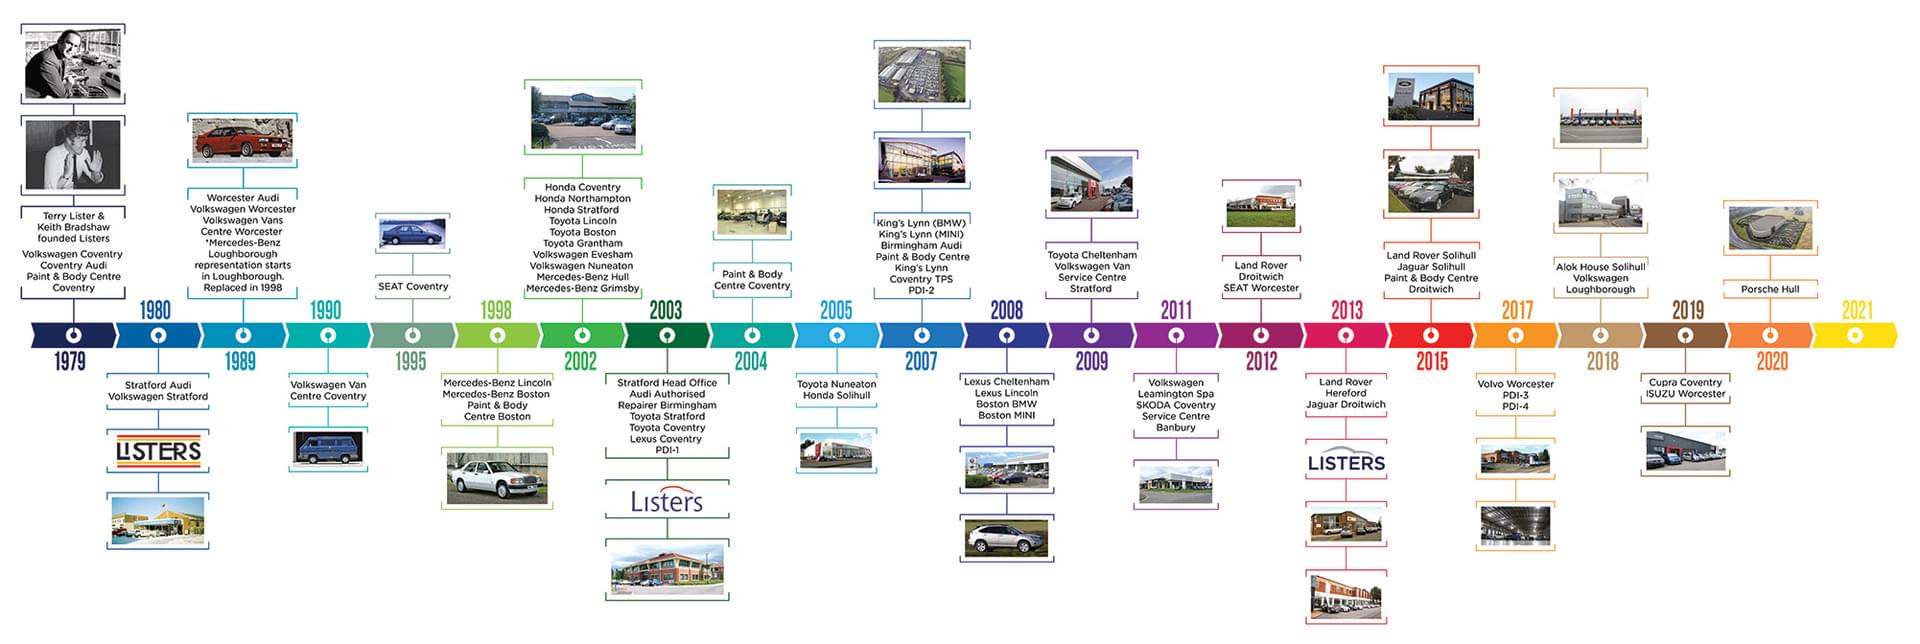 Listers History Timeline from 1979 to 2021